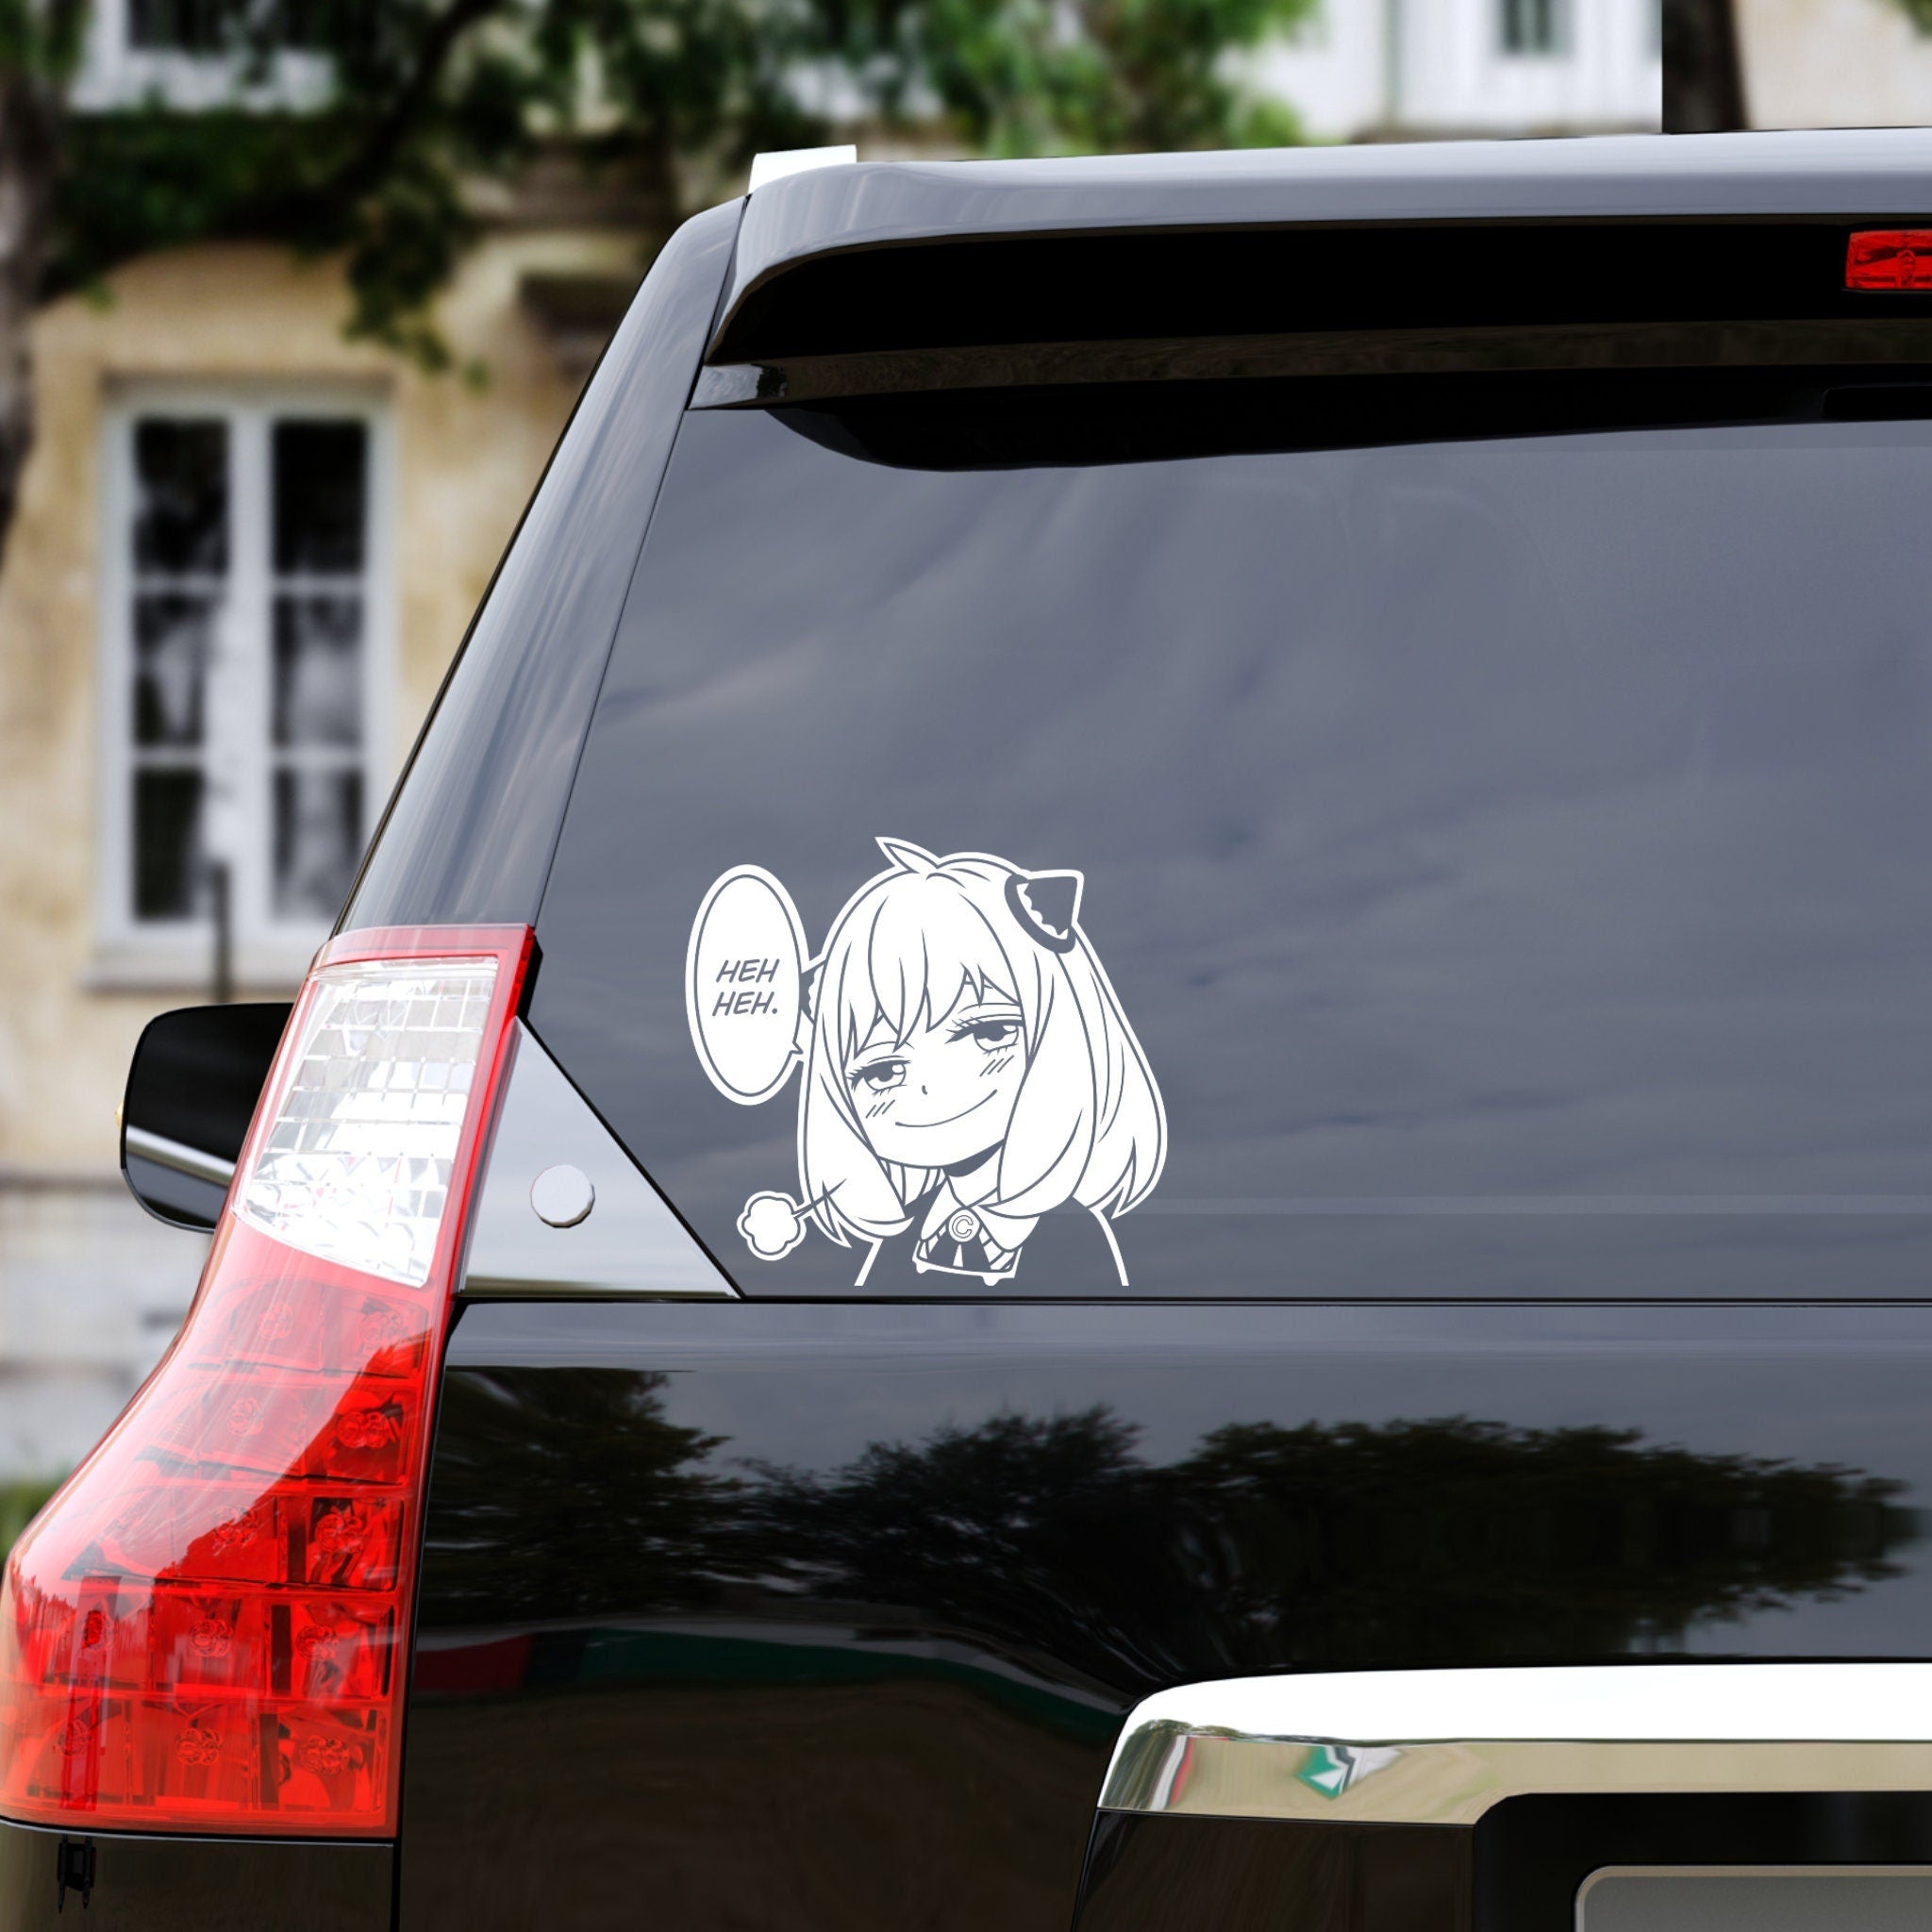 Amazoncom 16X16 Anime Car Decal Cartoon Car Accessories for Teens   Everything Else